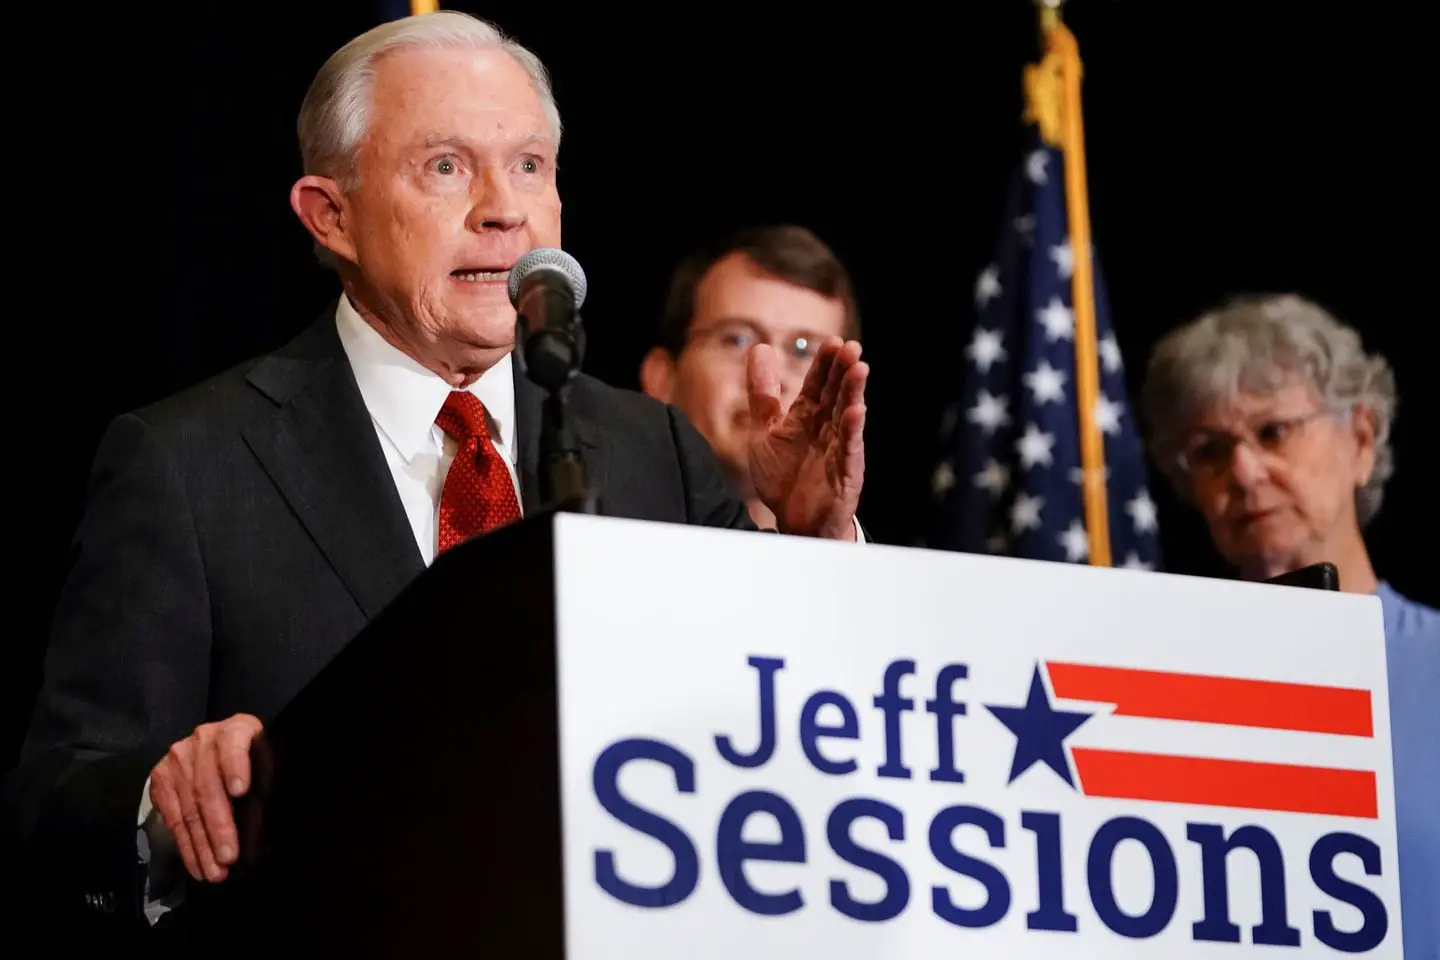 Trump campaign calls Sessions delusional, asks him to stop promoting ...